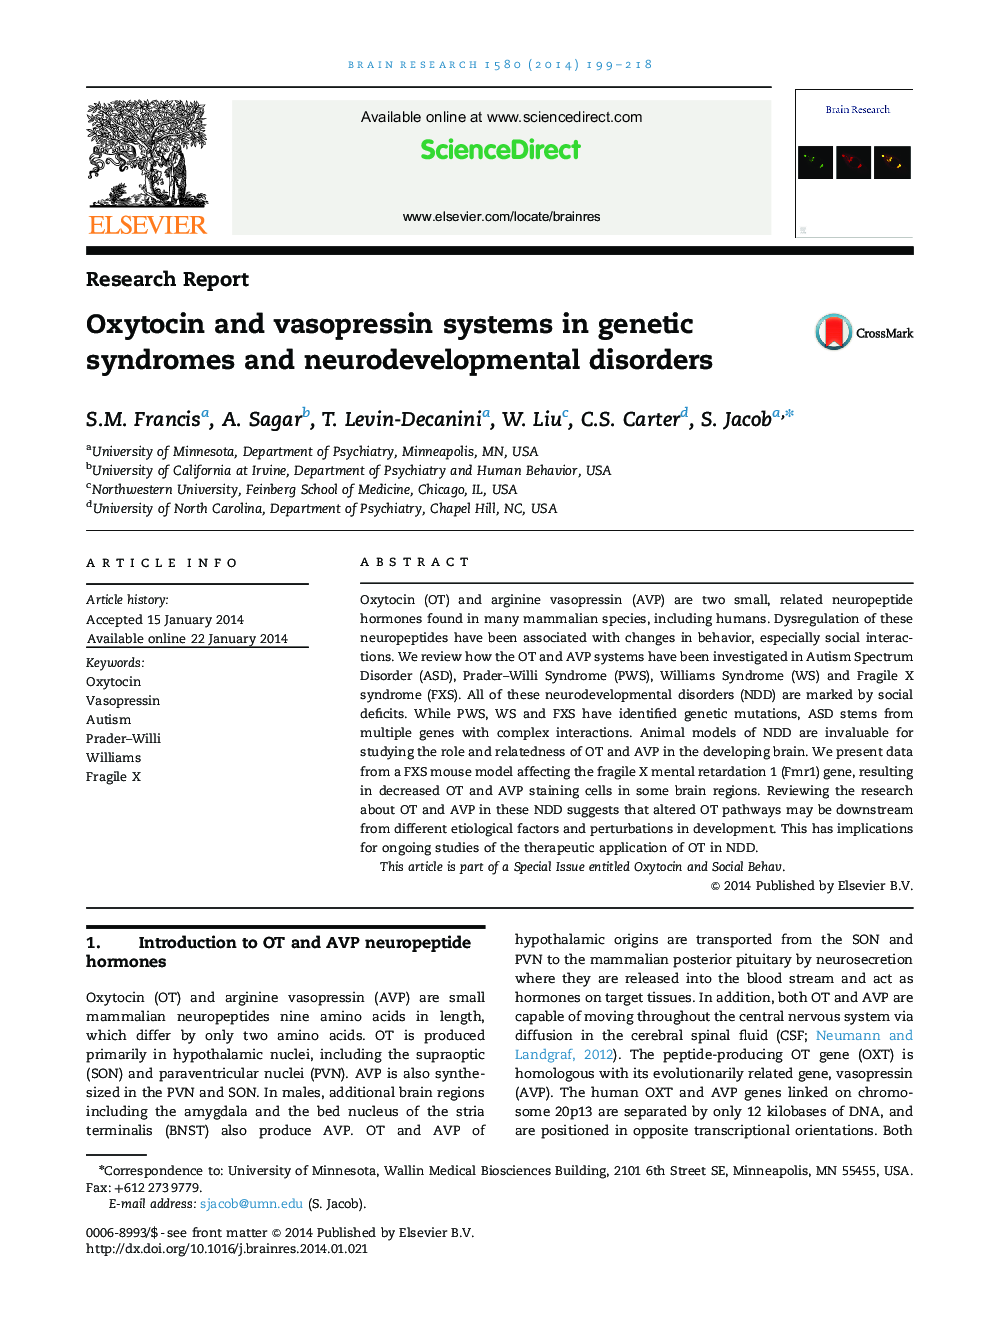 Oxytocin and vasopressin systems in genetic syndromes and neurodevelopmental disorders